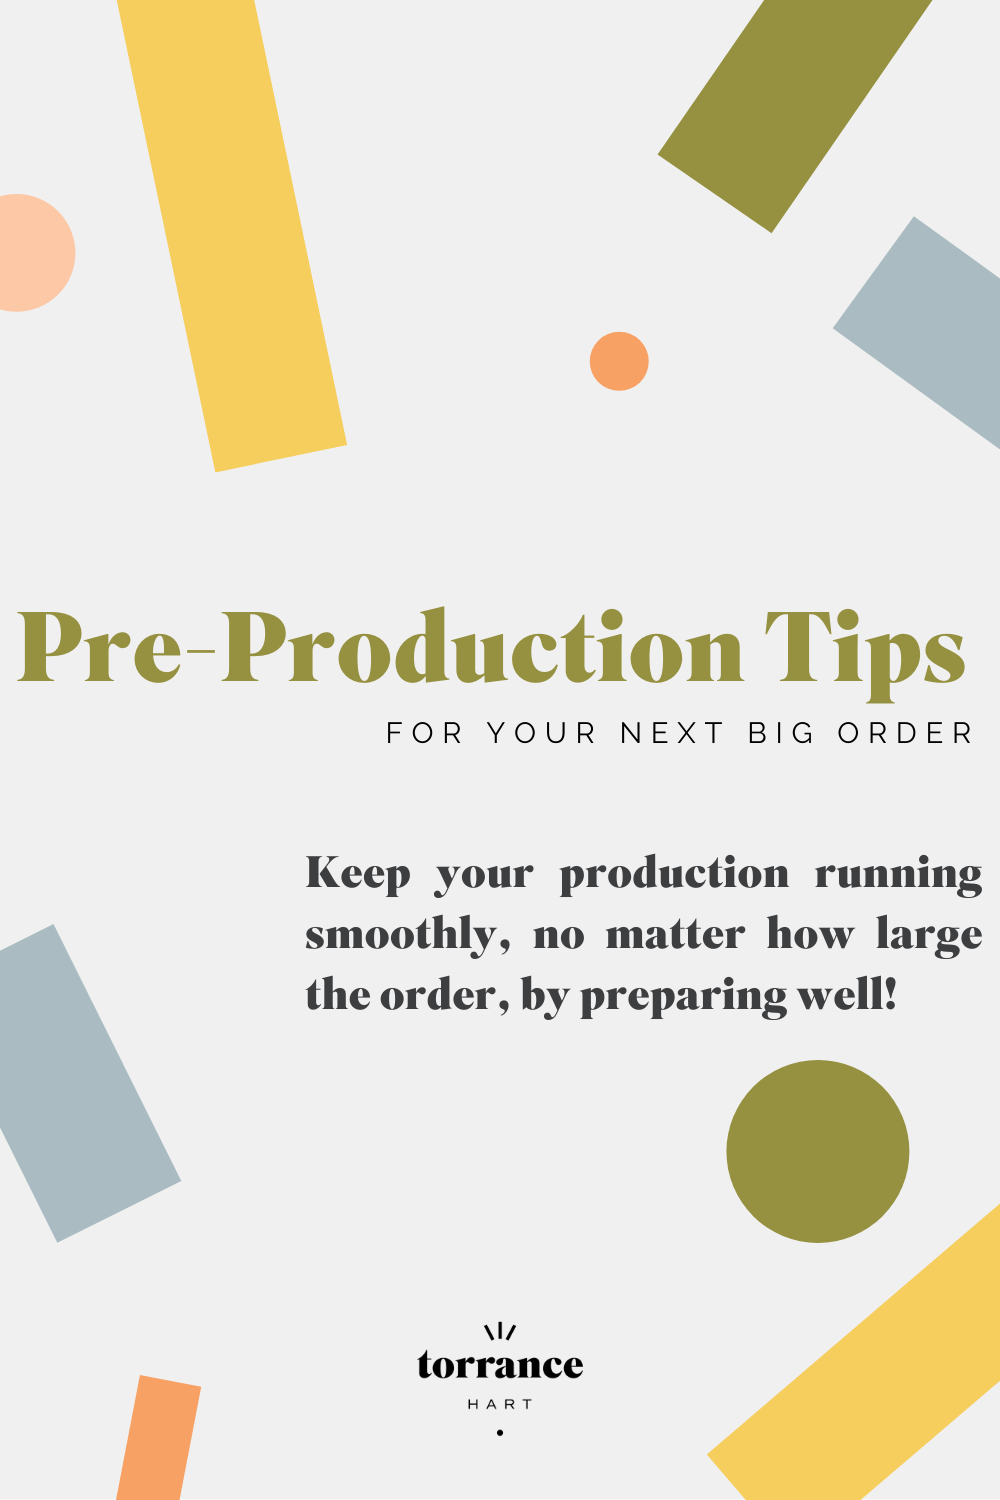 Pre-production tips for large orders